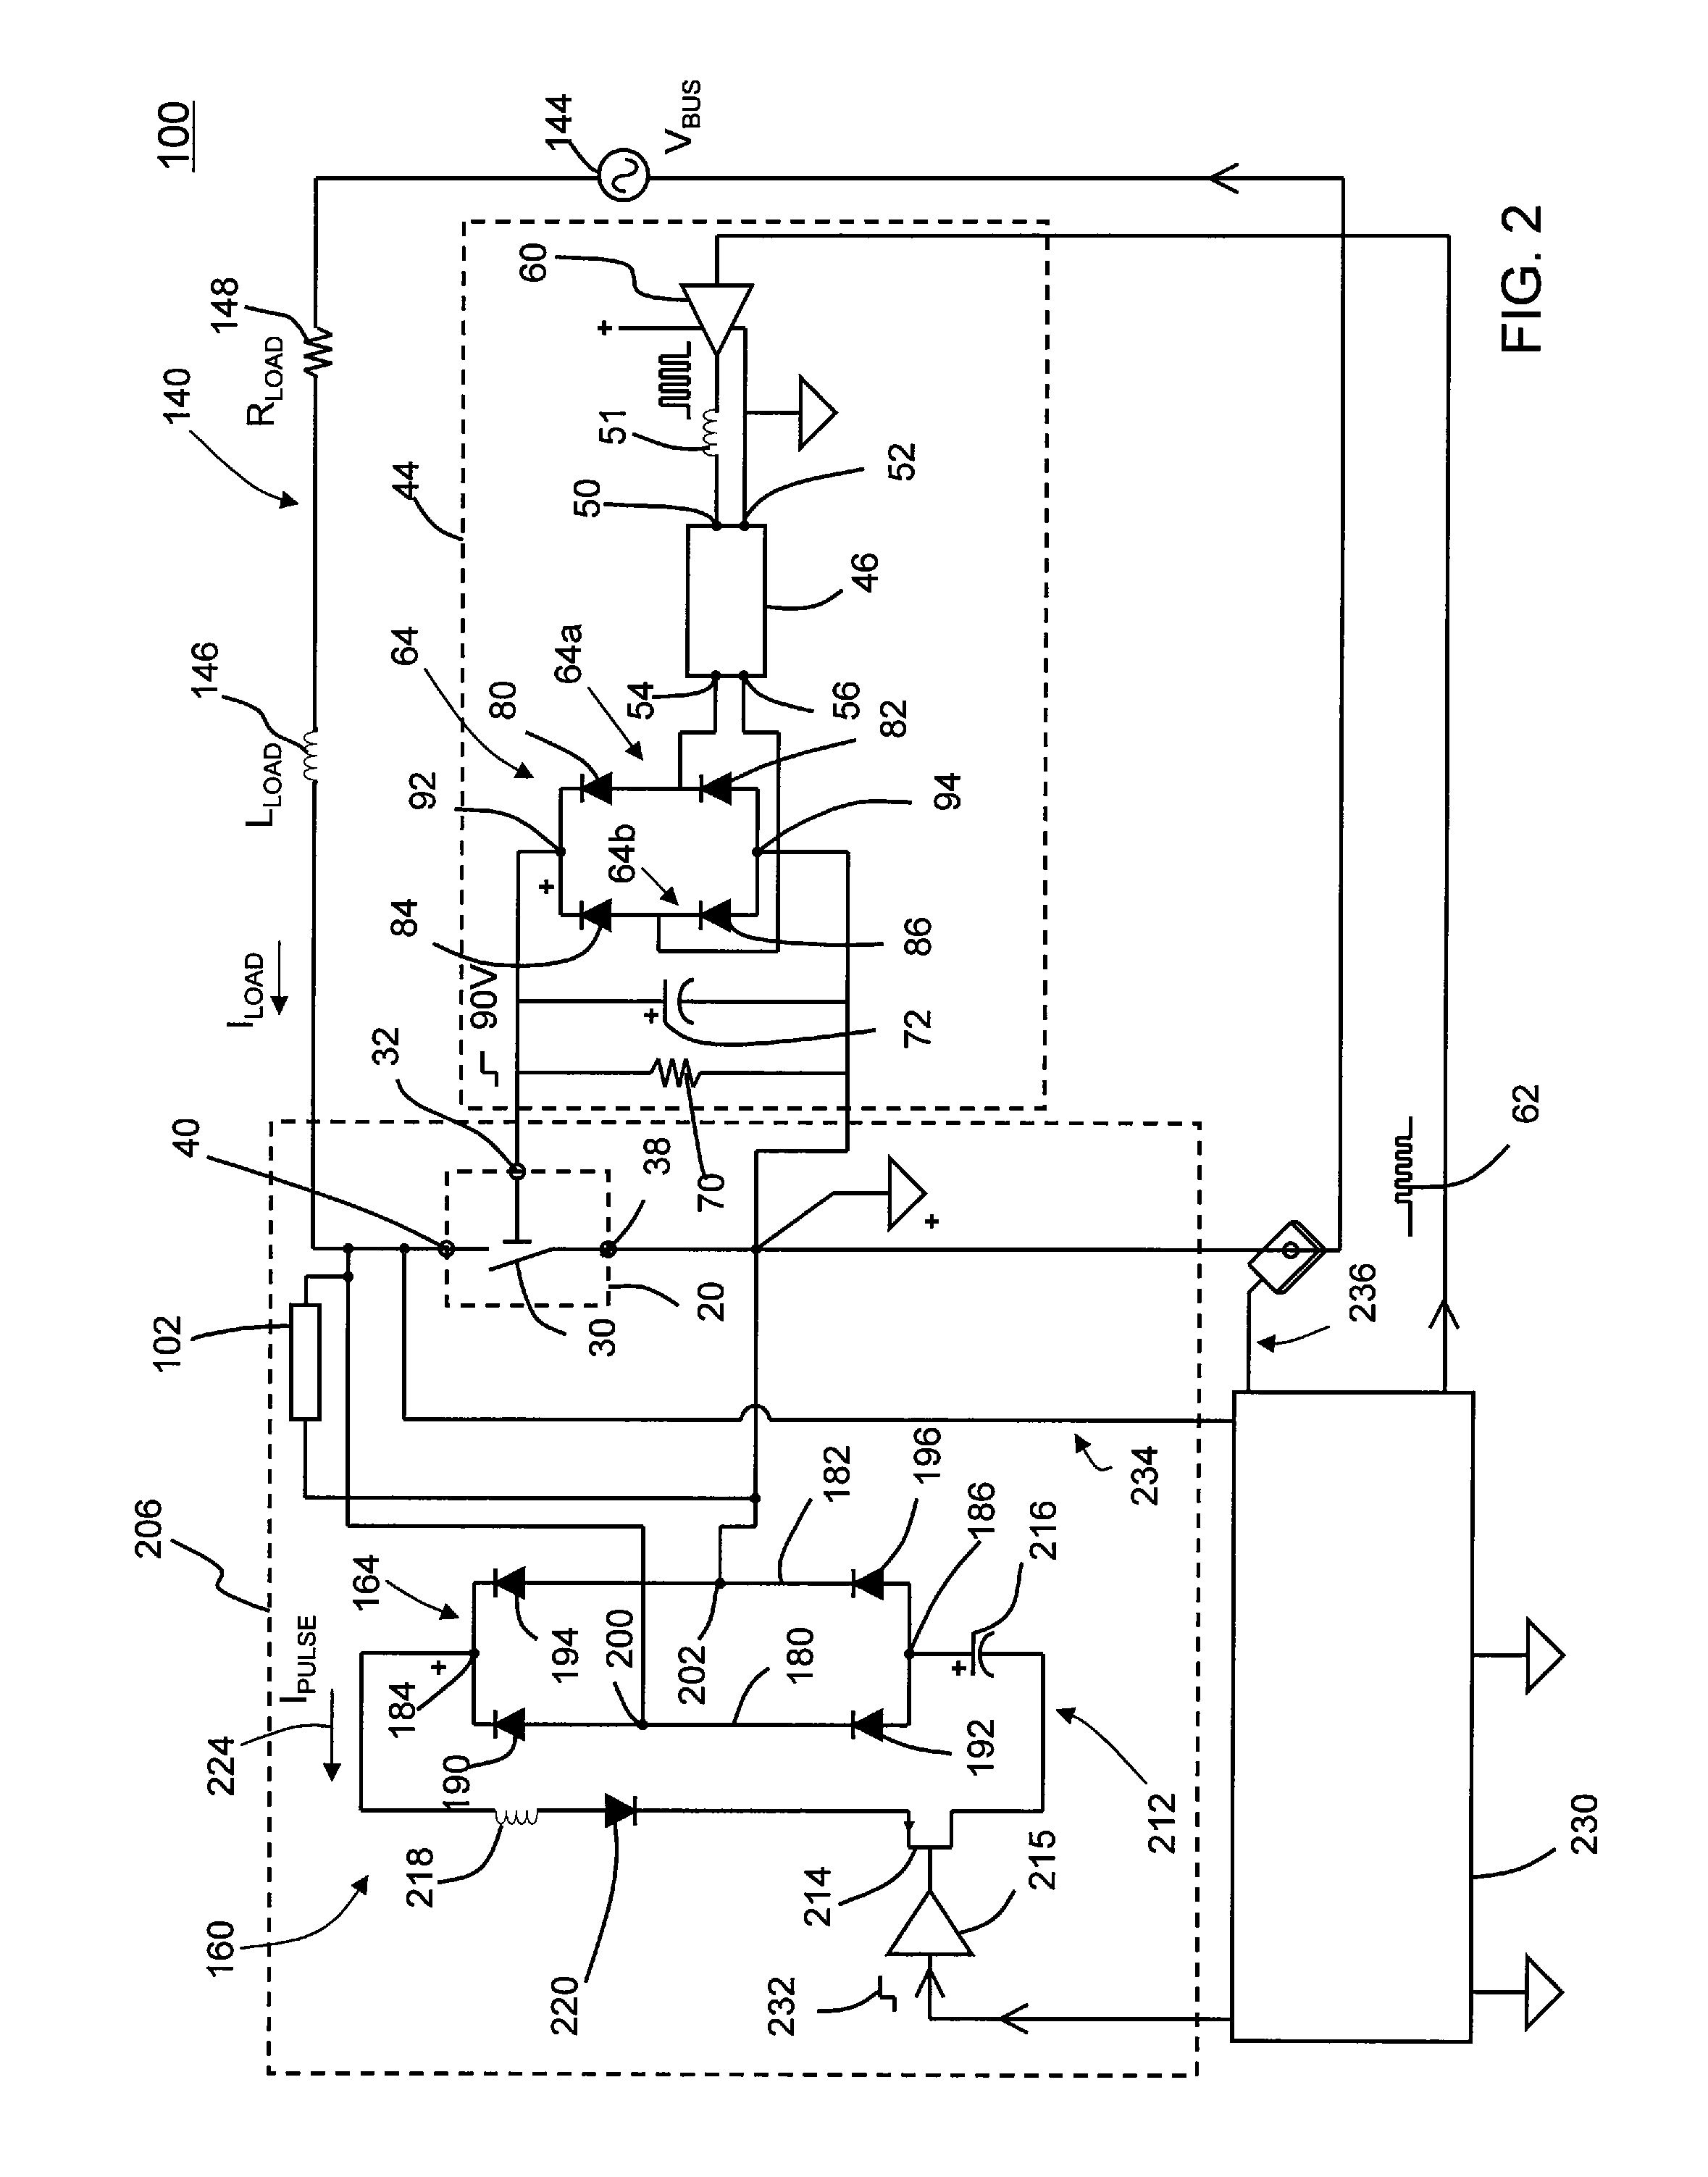 Circuit System With Supply Voltage For Driving An Electromechanical Switch